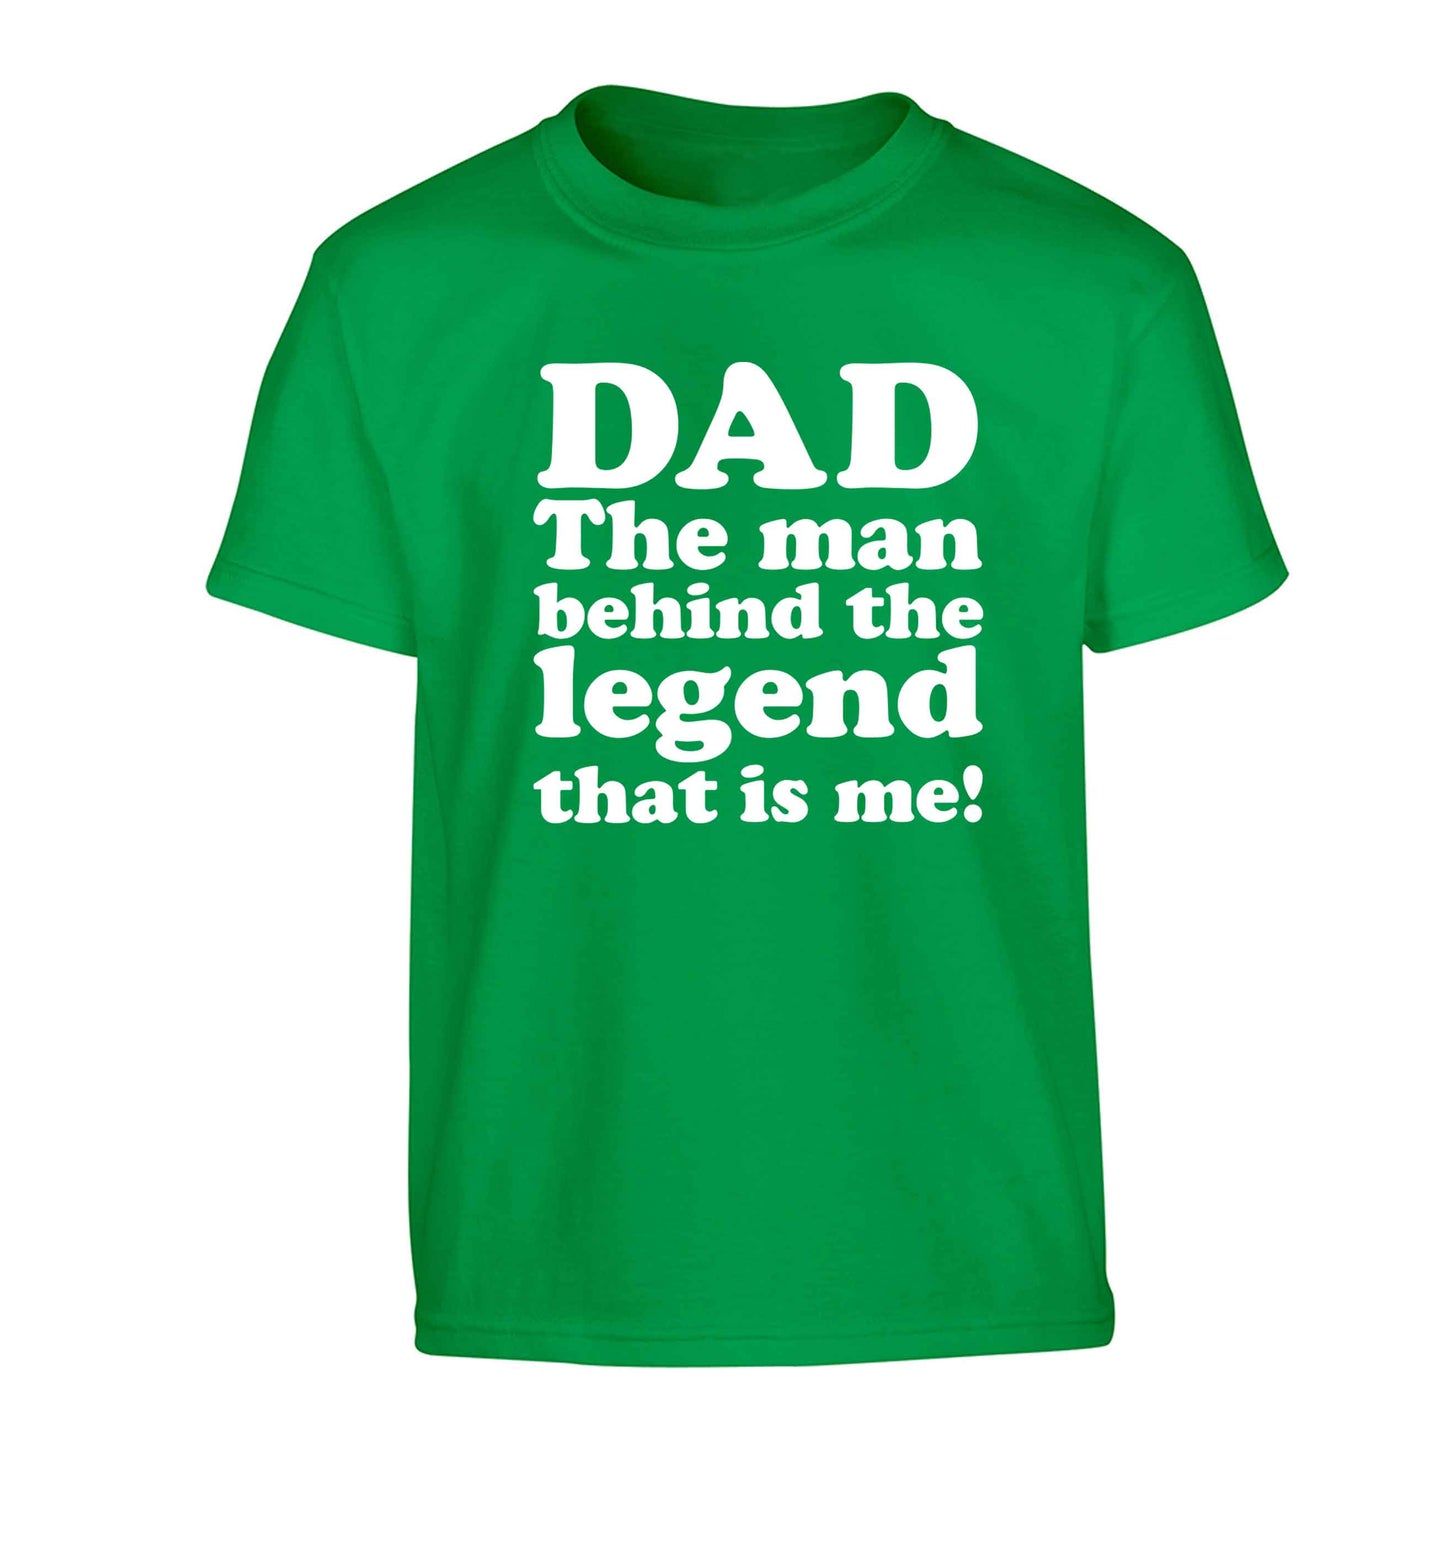 Dad the man behind the legend that is me Children's green Tshirt 12-13 Years